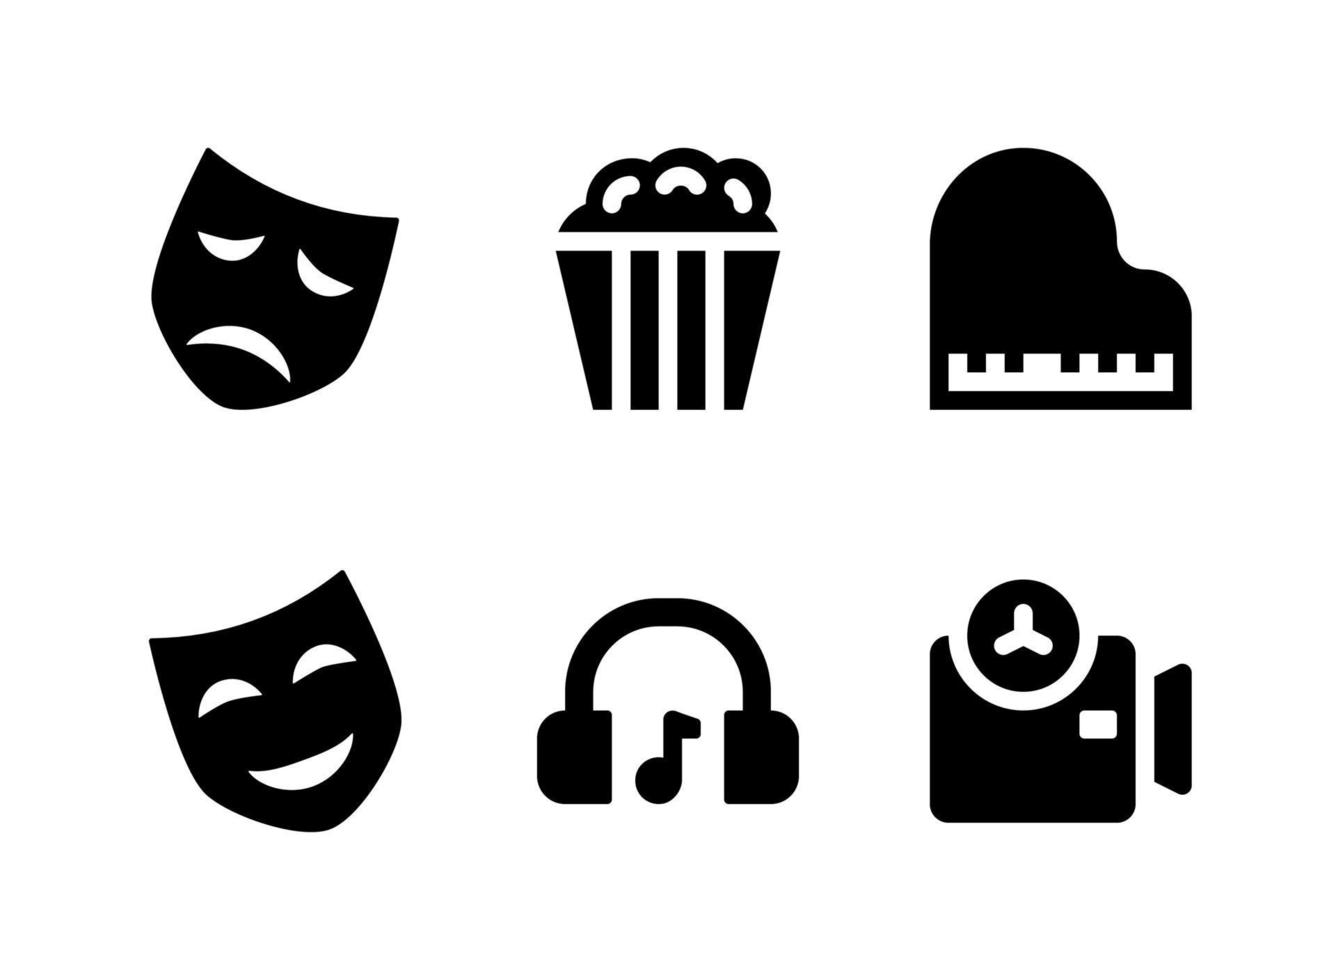 Simple Set of Entertainment Related Vector Solid Icons. Contains Icons as Popcorn, Theatre Mask, Headphone, Camera and more.